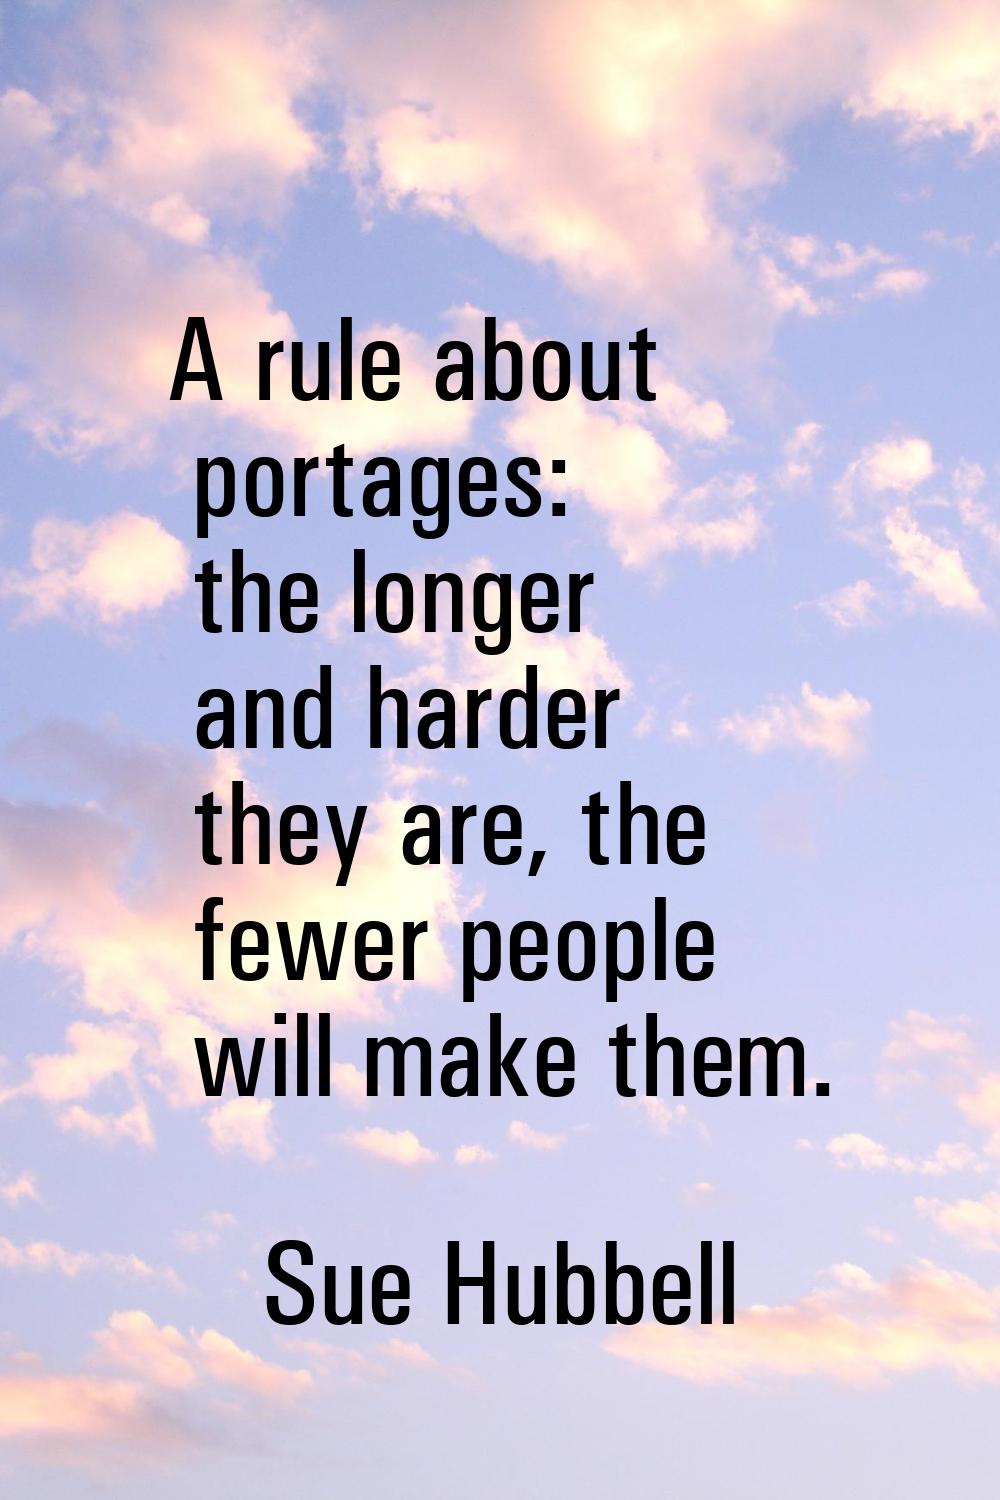 A rule about portages: the longer and harder they are, the fewer people will make them.